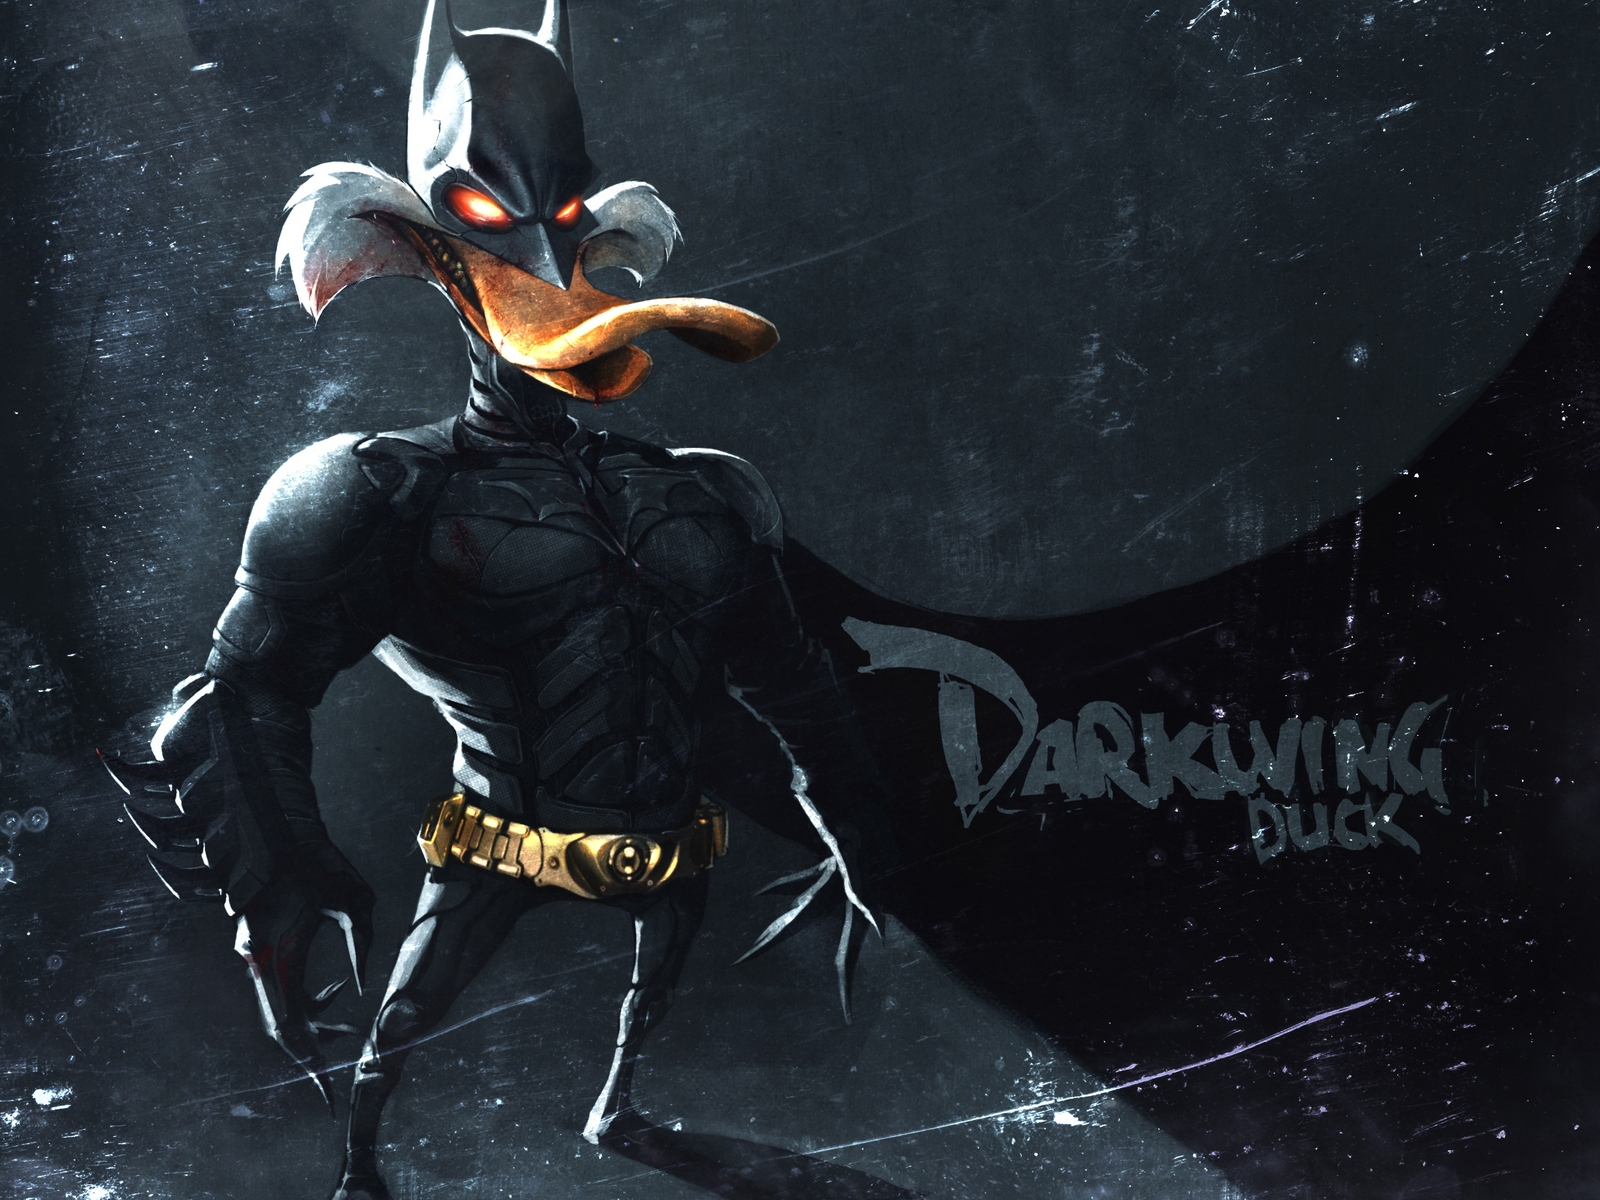 Darkwing Duck Mask for 1600 x 1200 resolution